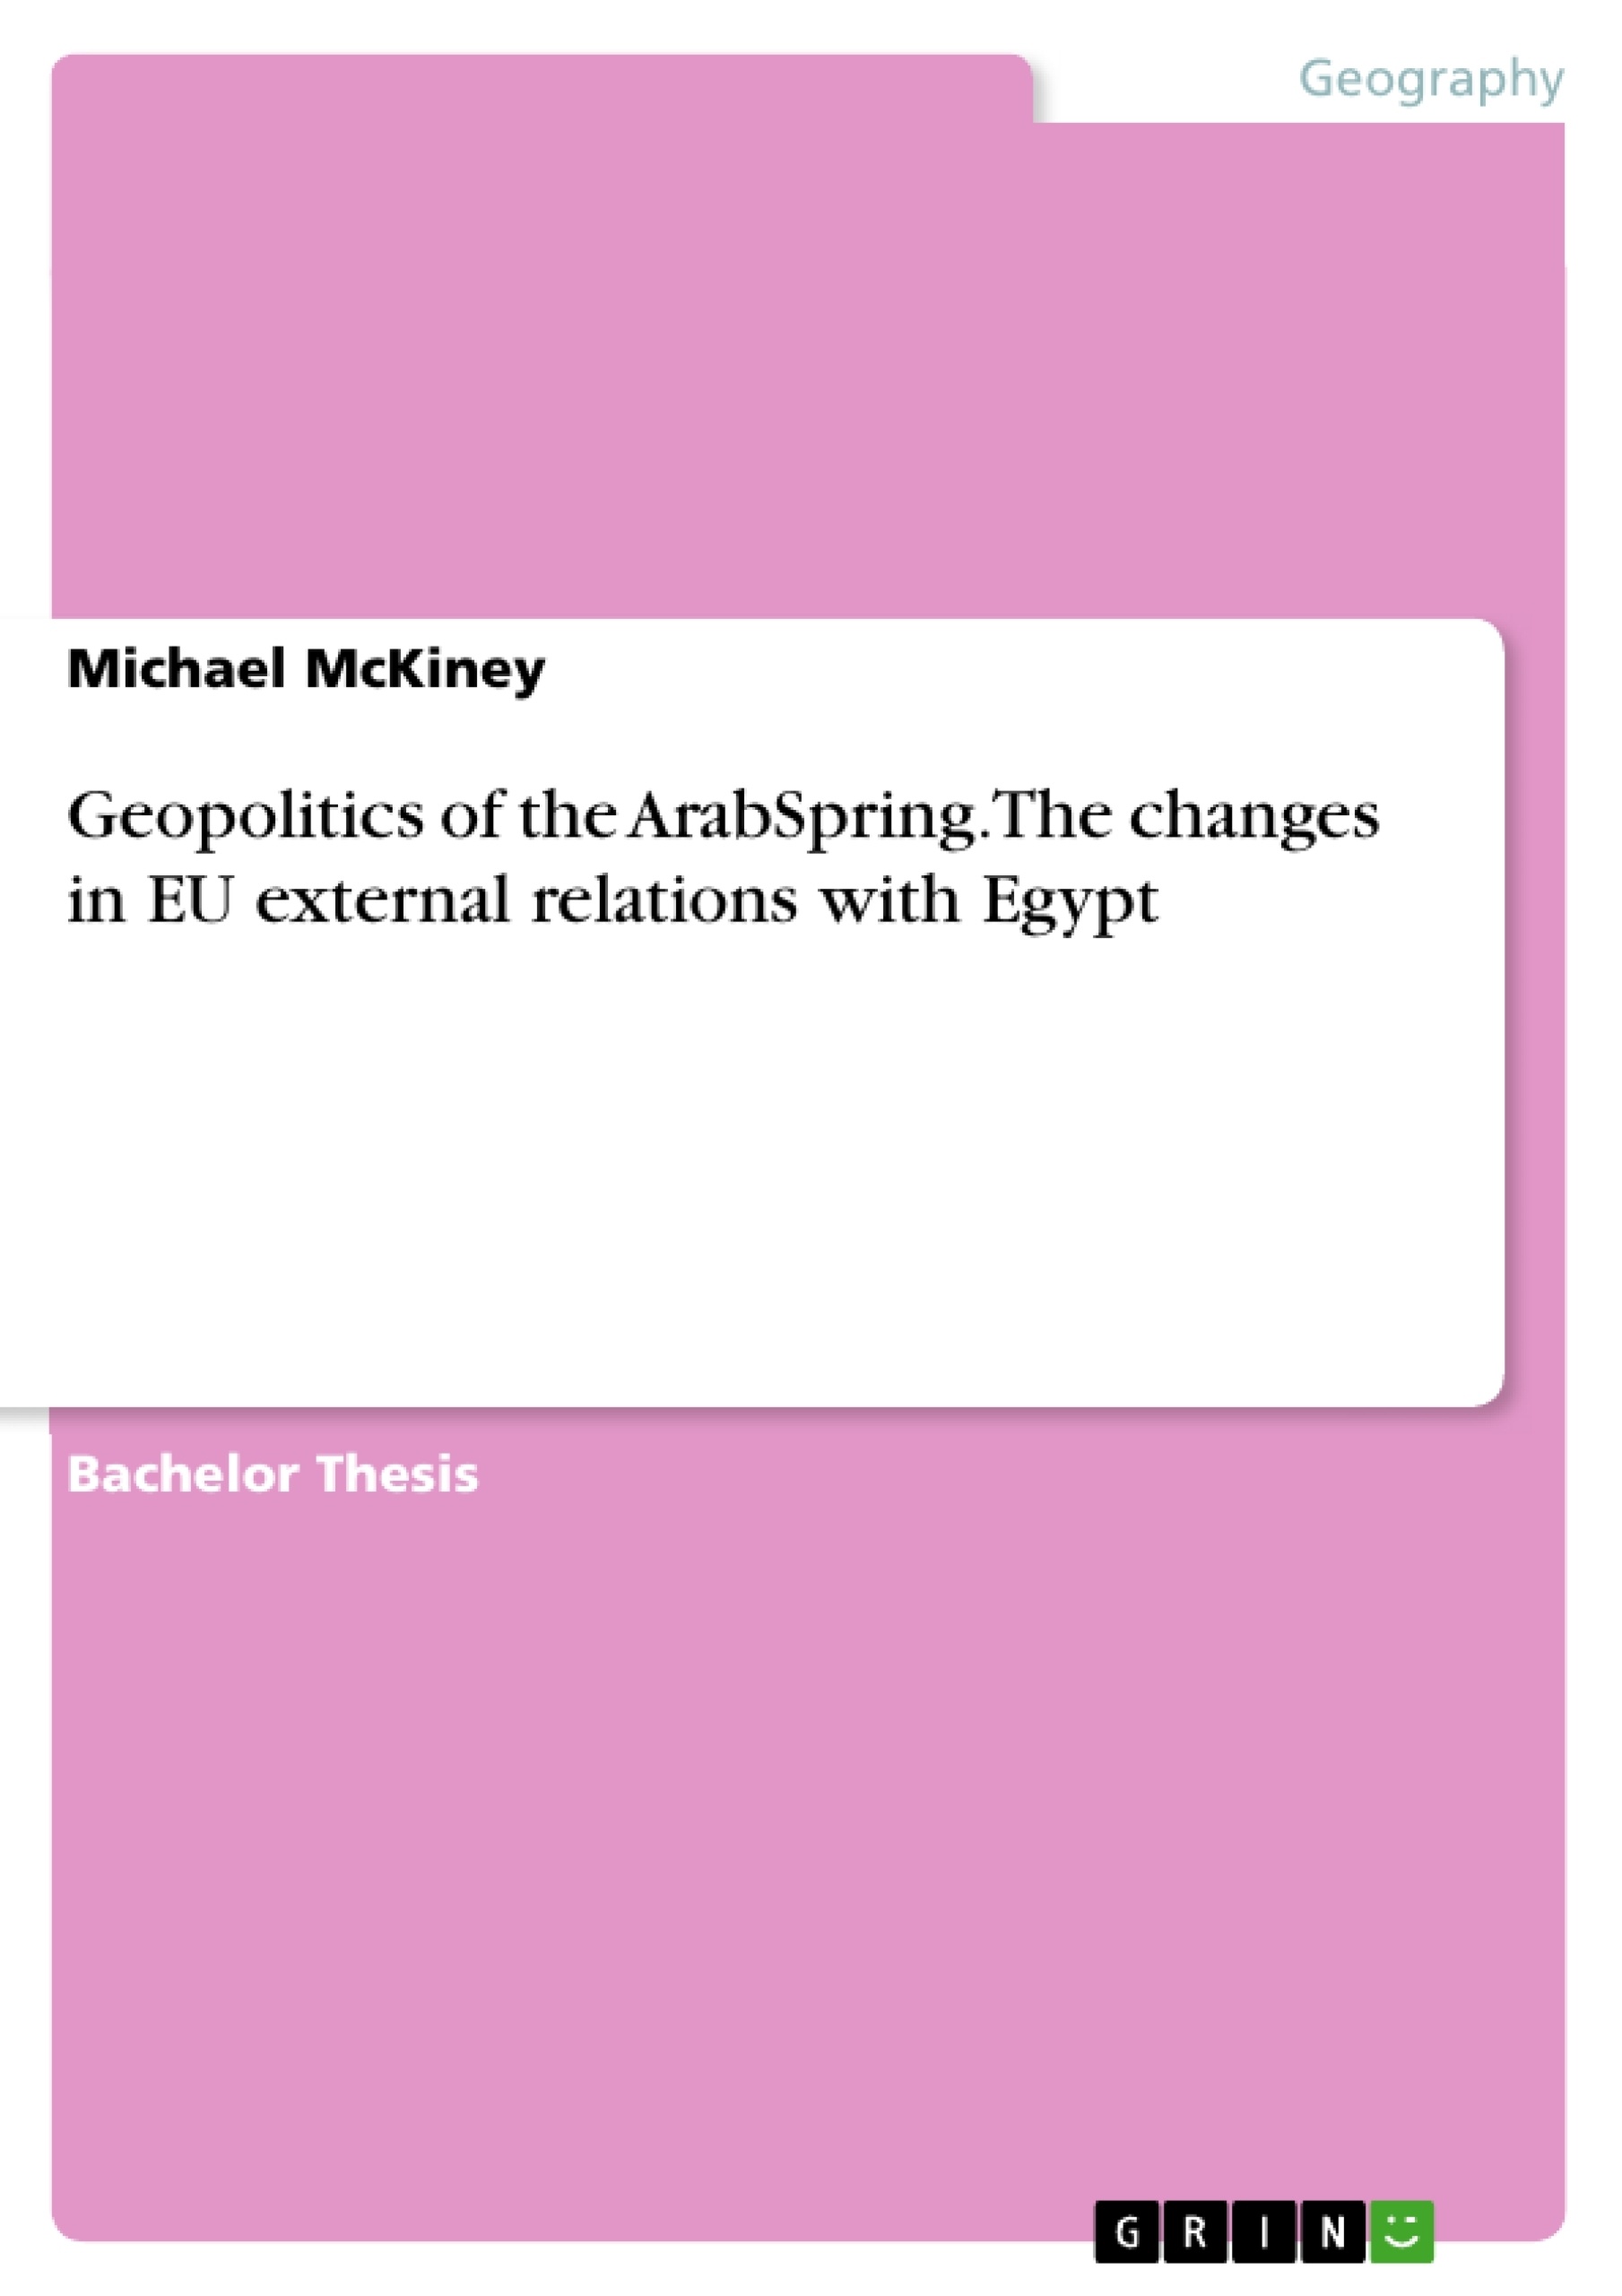 Título: Geopolitics of the ArabSpring. The changes in EU external relations with Egypt